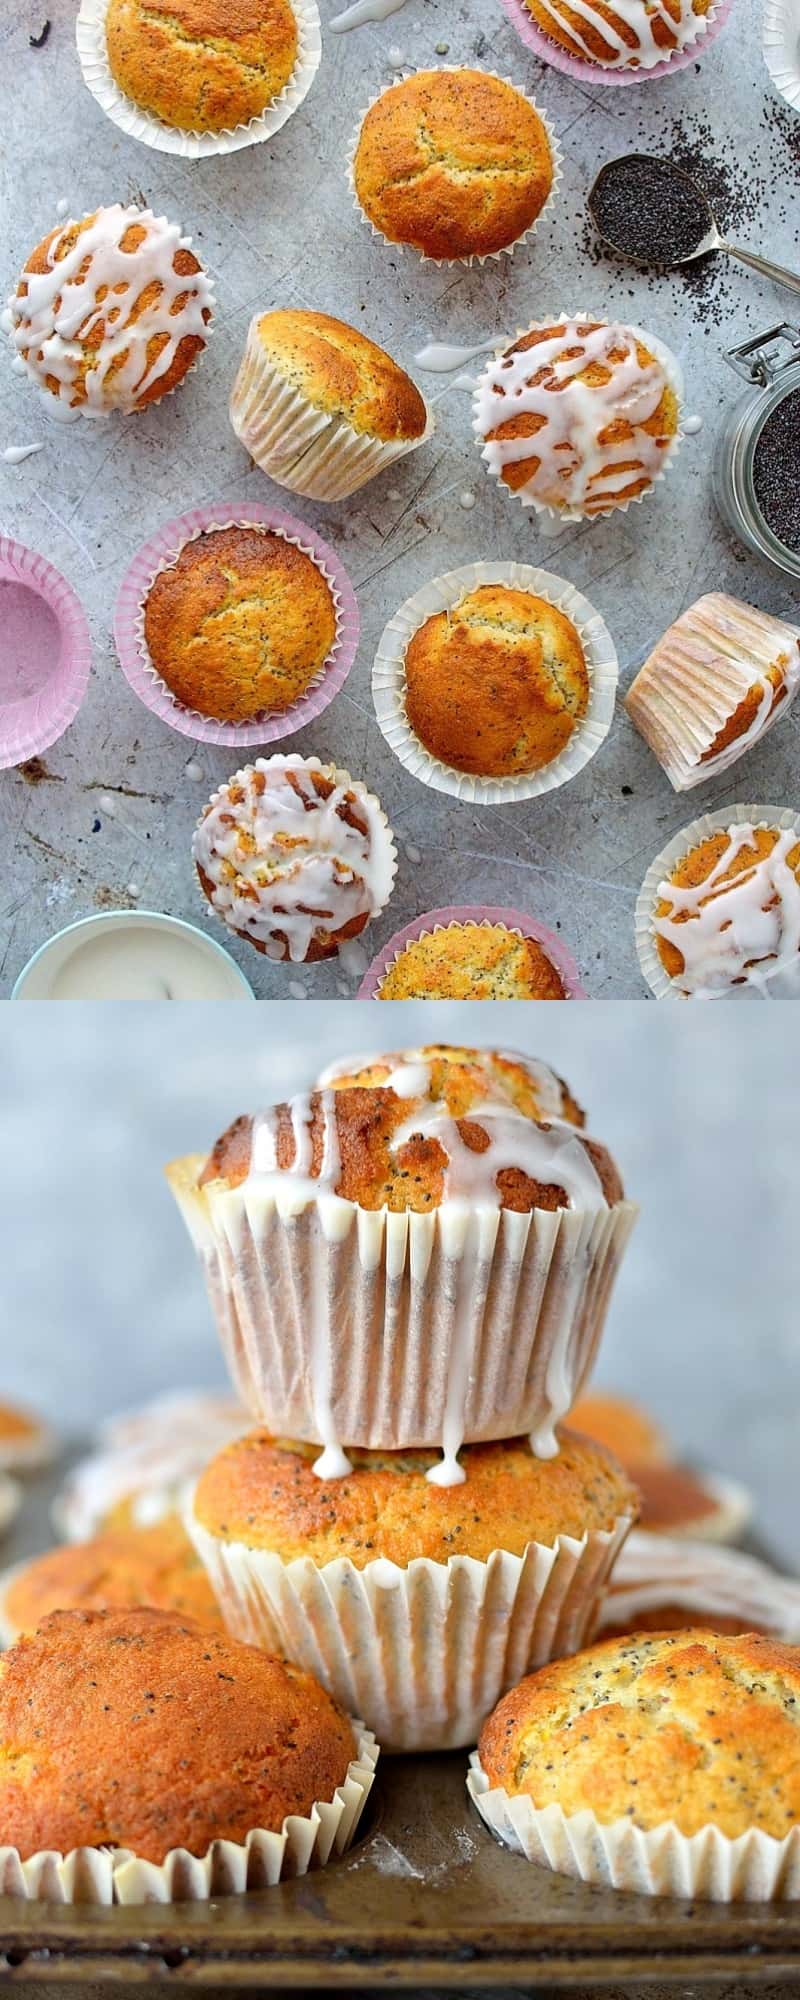 Lemon poppy seed muffins - easy to make and great for breakfast or lunchboxes.